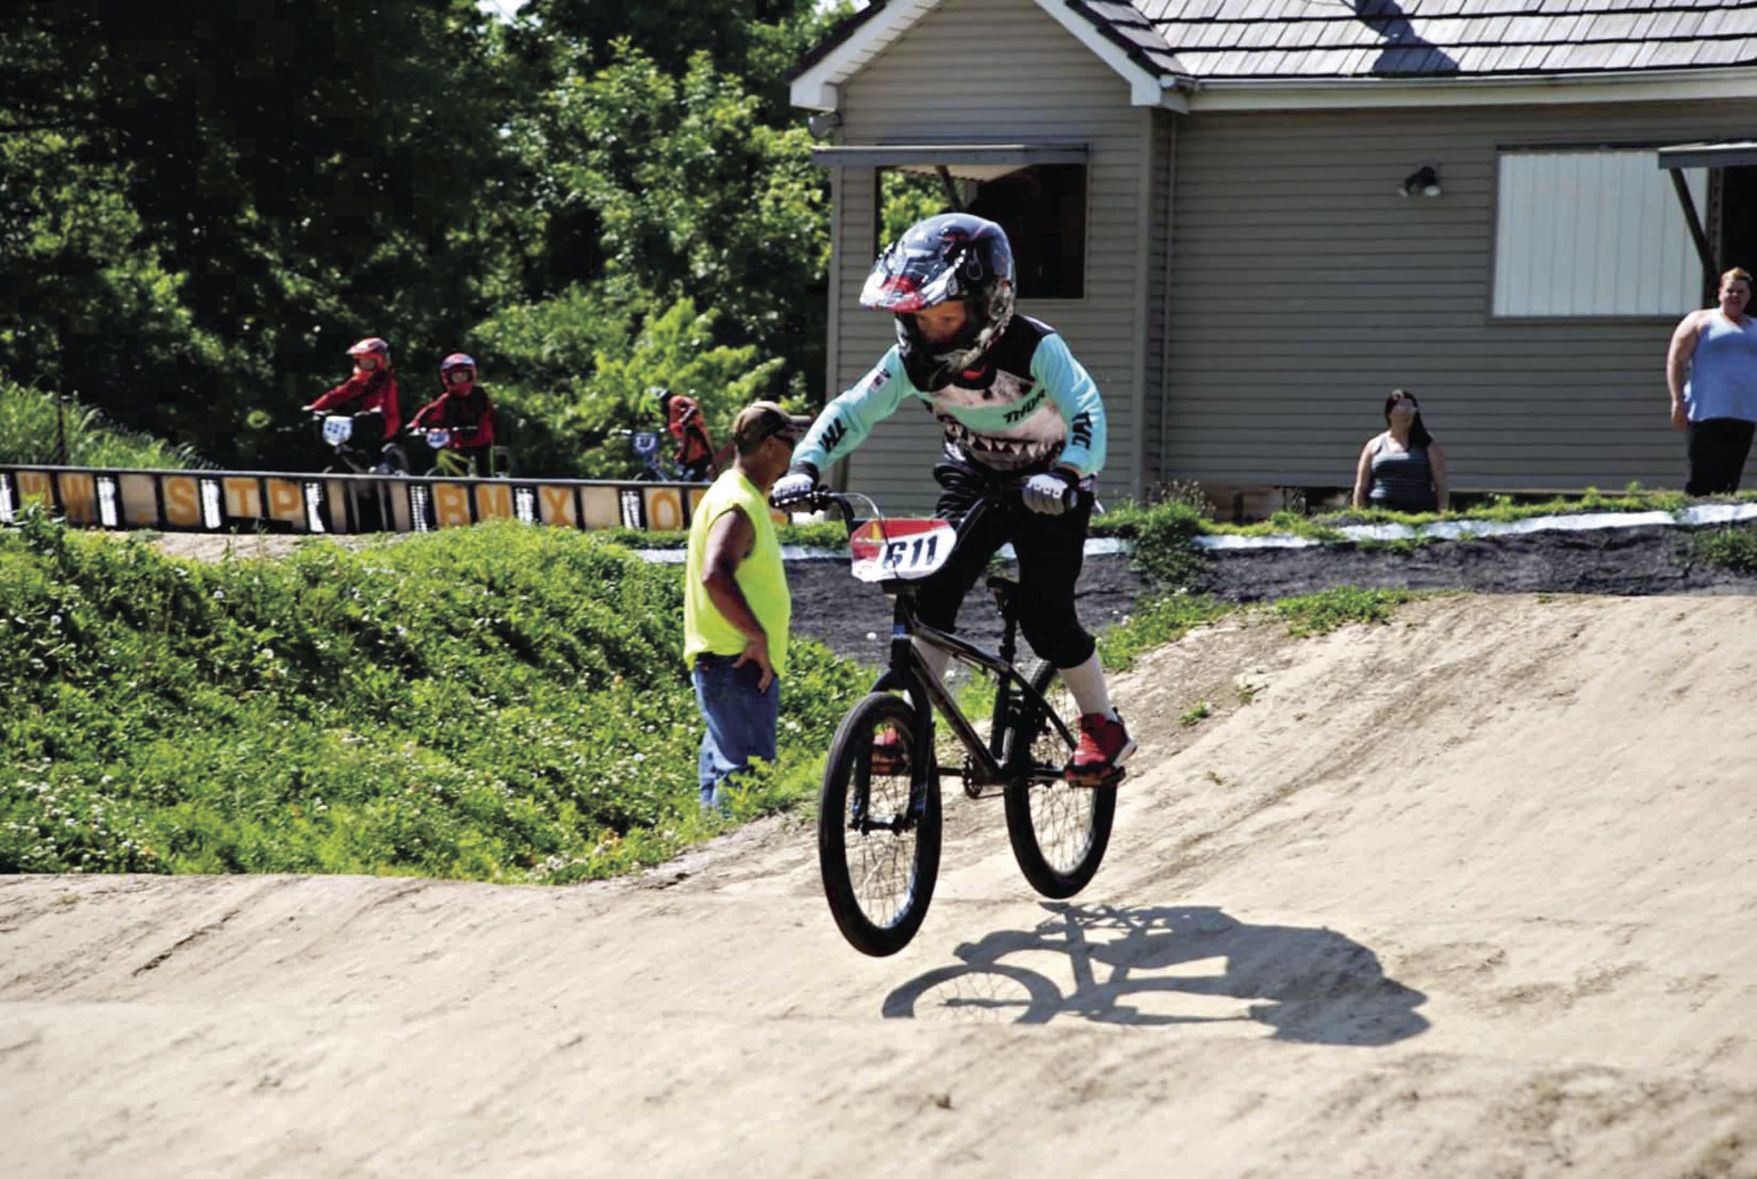 bmx for 7 year old boy